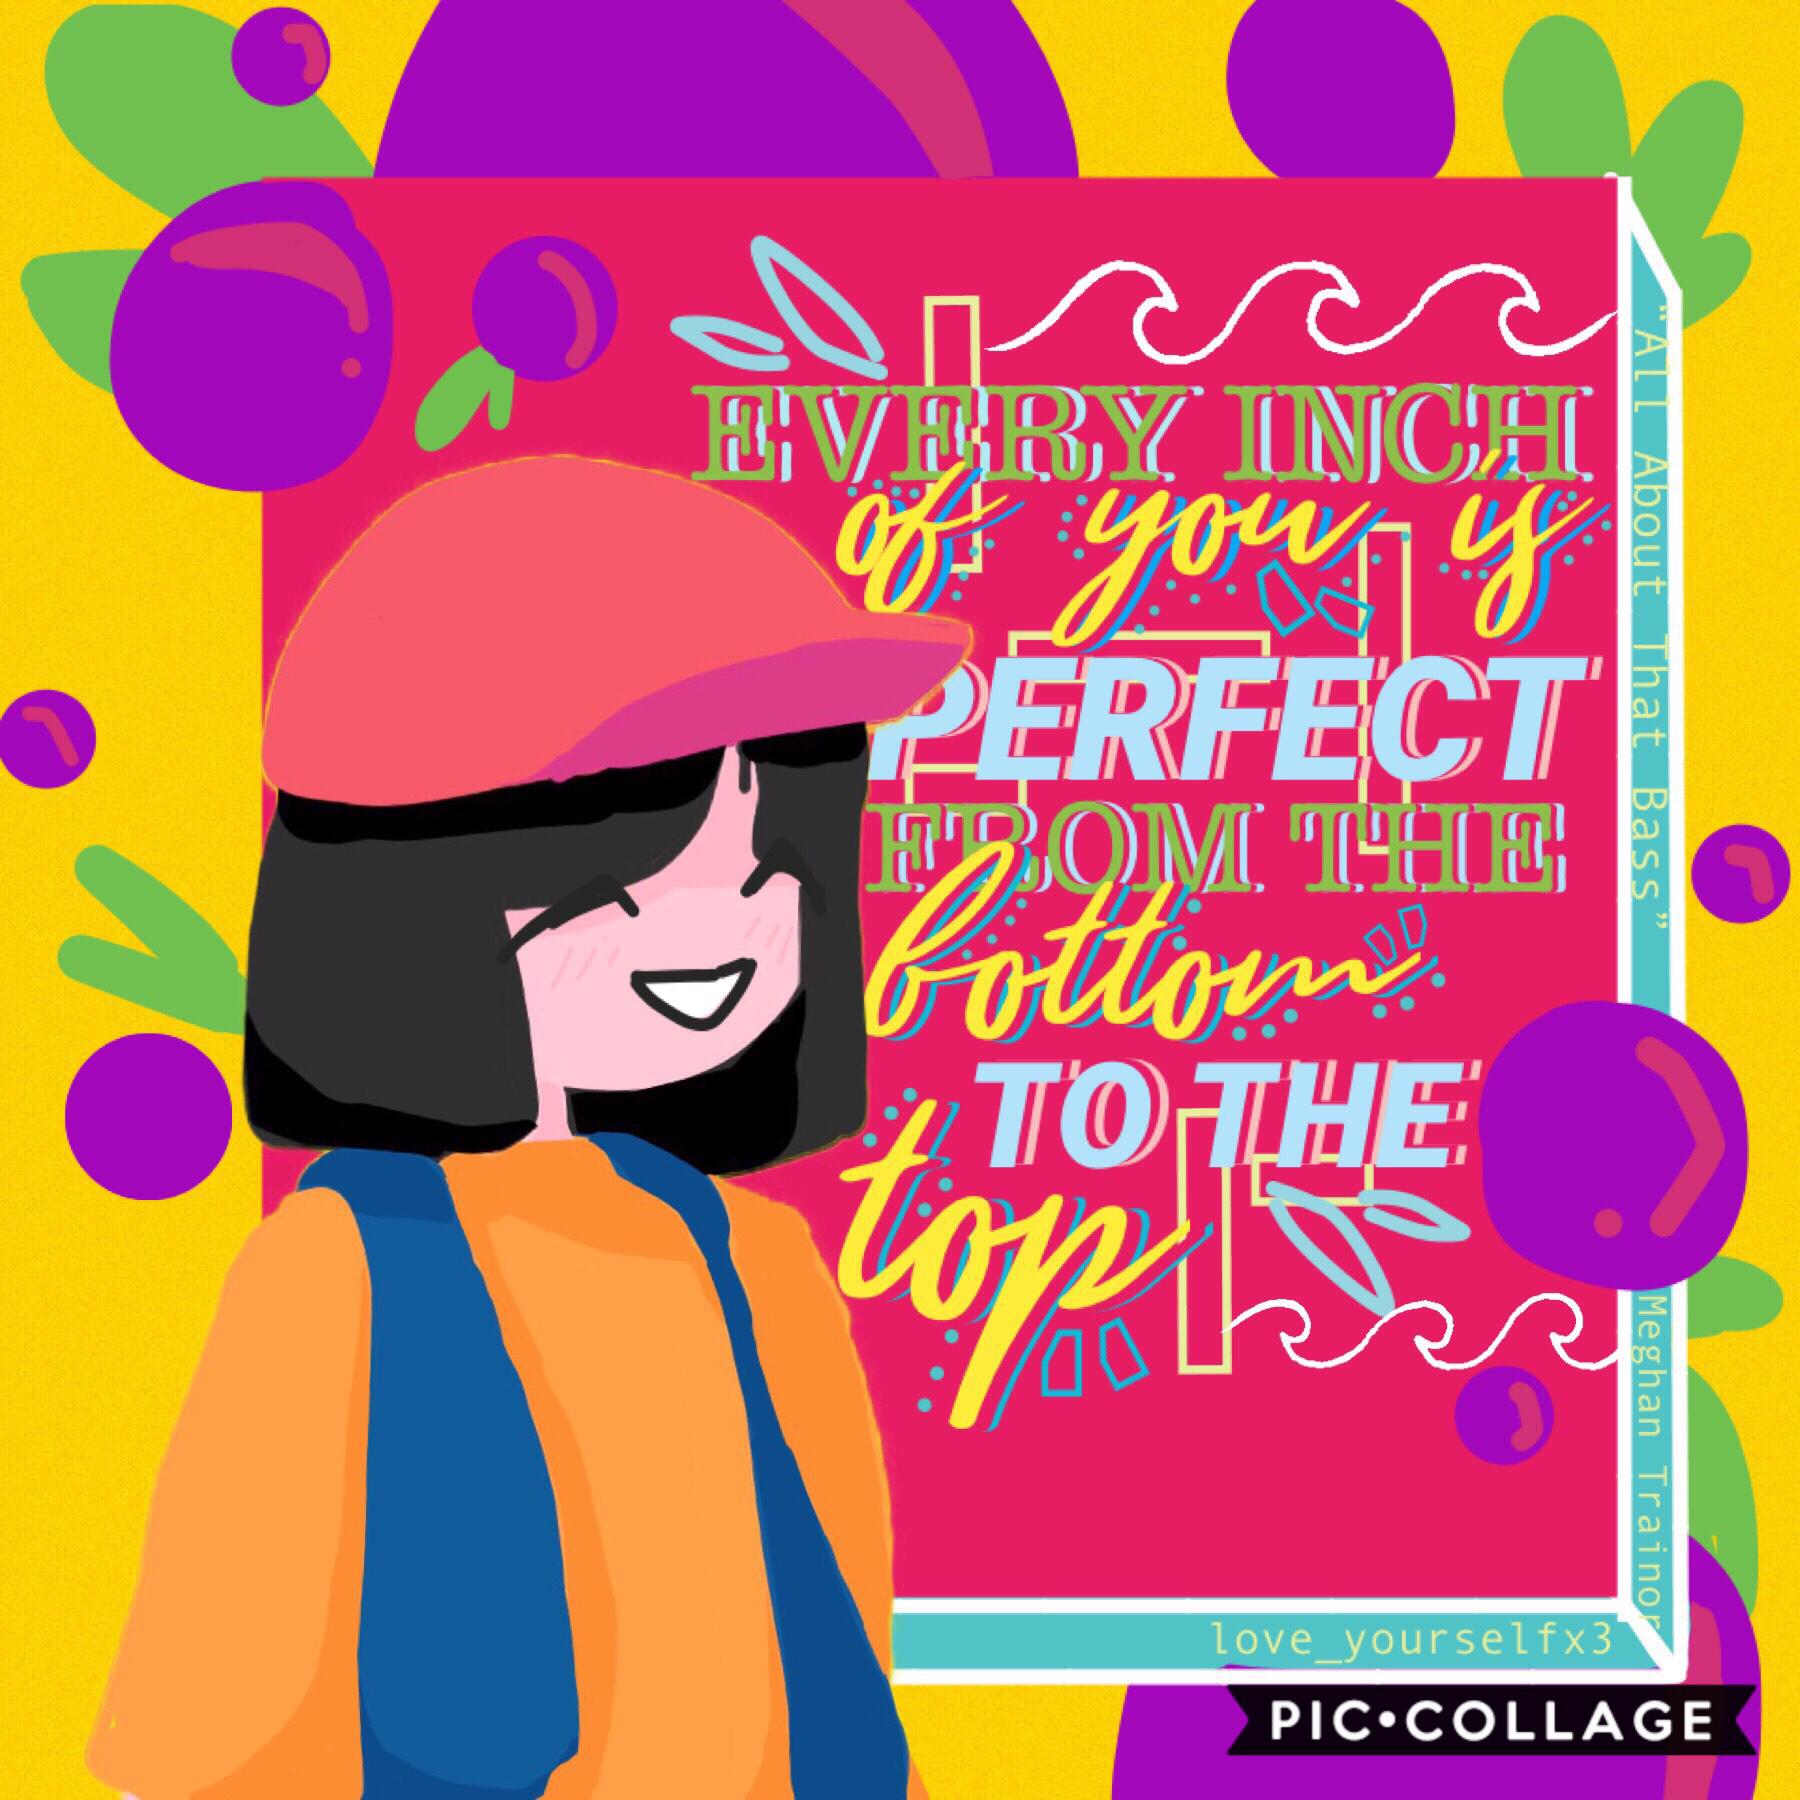 <daily dose of positivity> 💜Tap!💜

“All About That Bass” by Meghan Trainor!

I did too much on the text this time.. Welp I’ll strike a balance soon!!

Want an icon like mine? Just hmu! Details in comments :))
